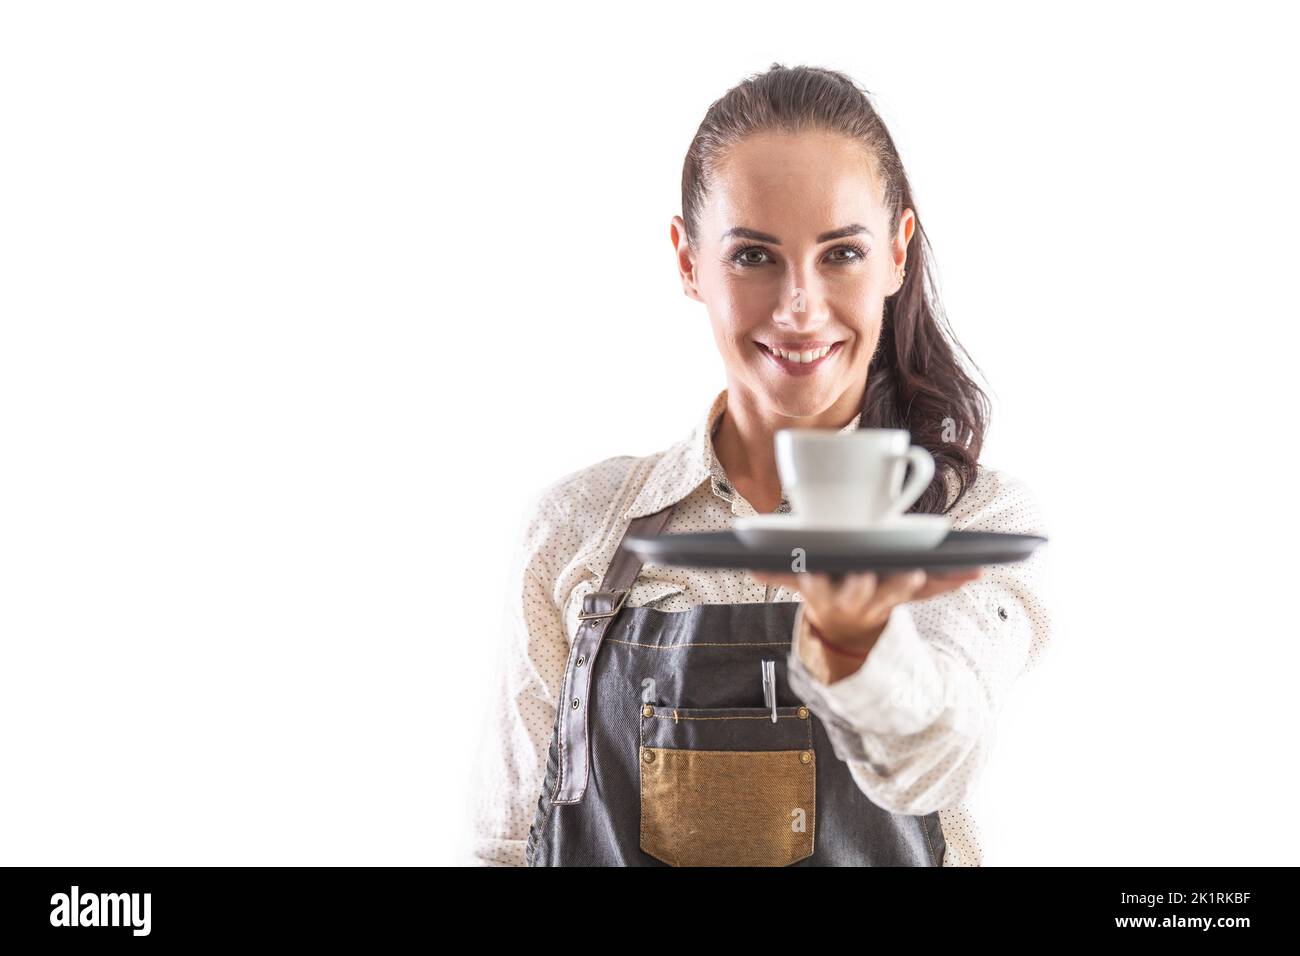 Waitress in apron offering coffee on tray on isolated background. Stock Photo